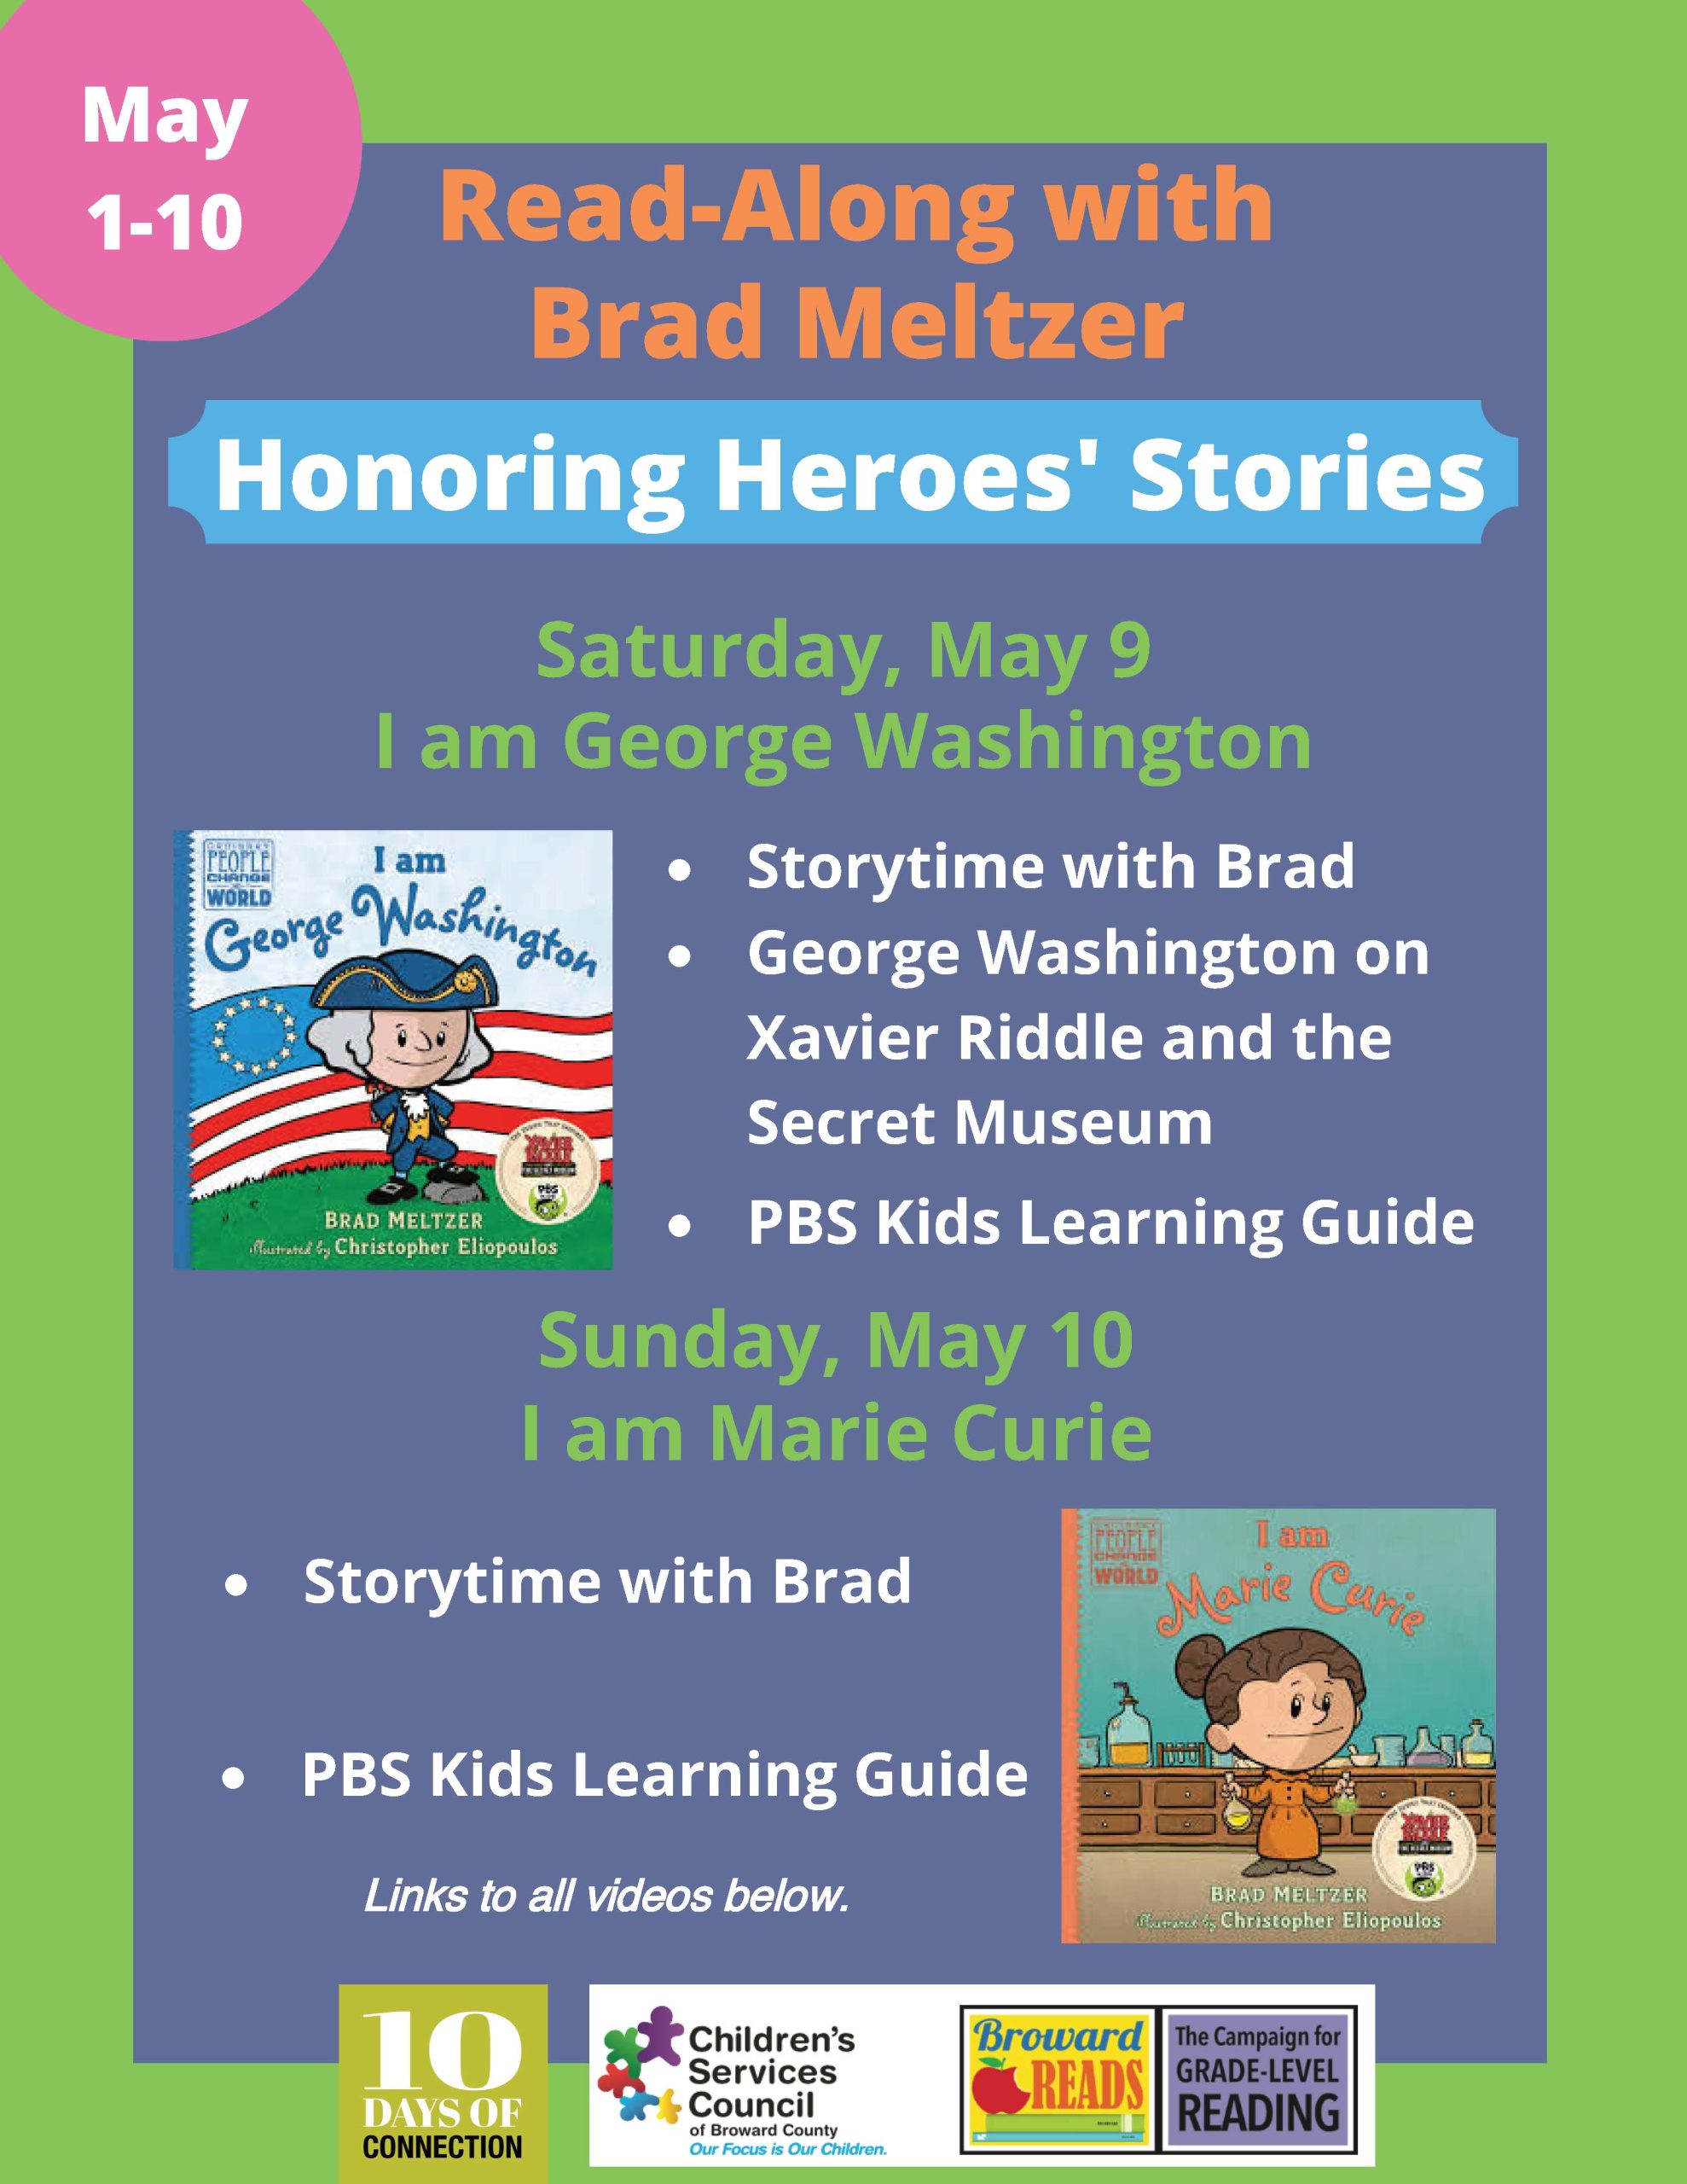 read along with brad meltzer image 7